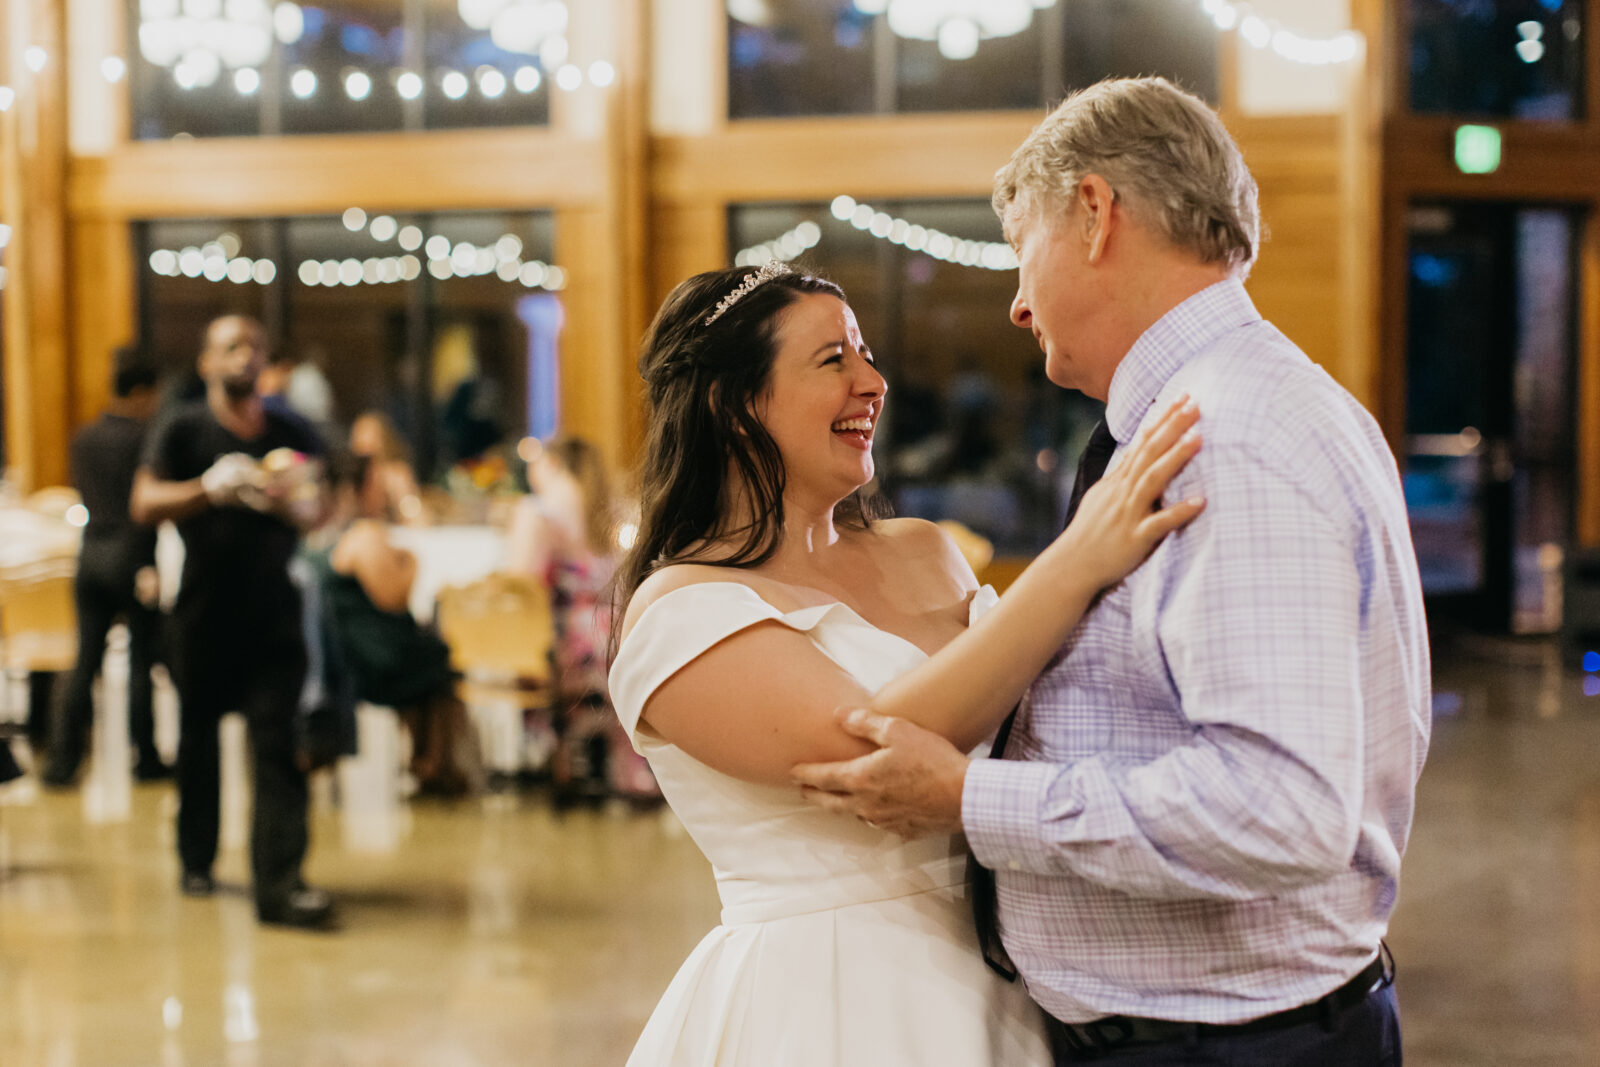 A photo of the bride and her father dancing at the reception